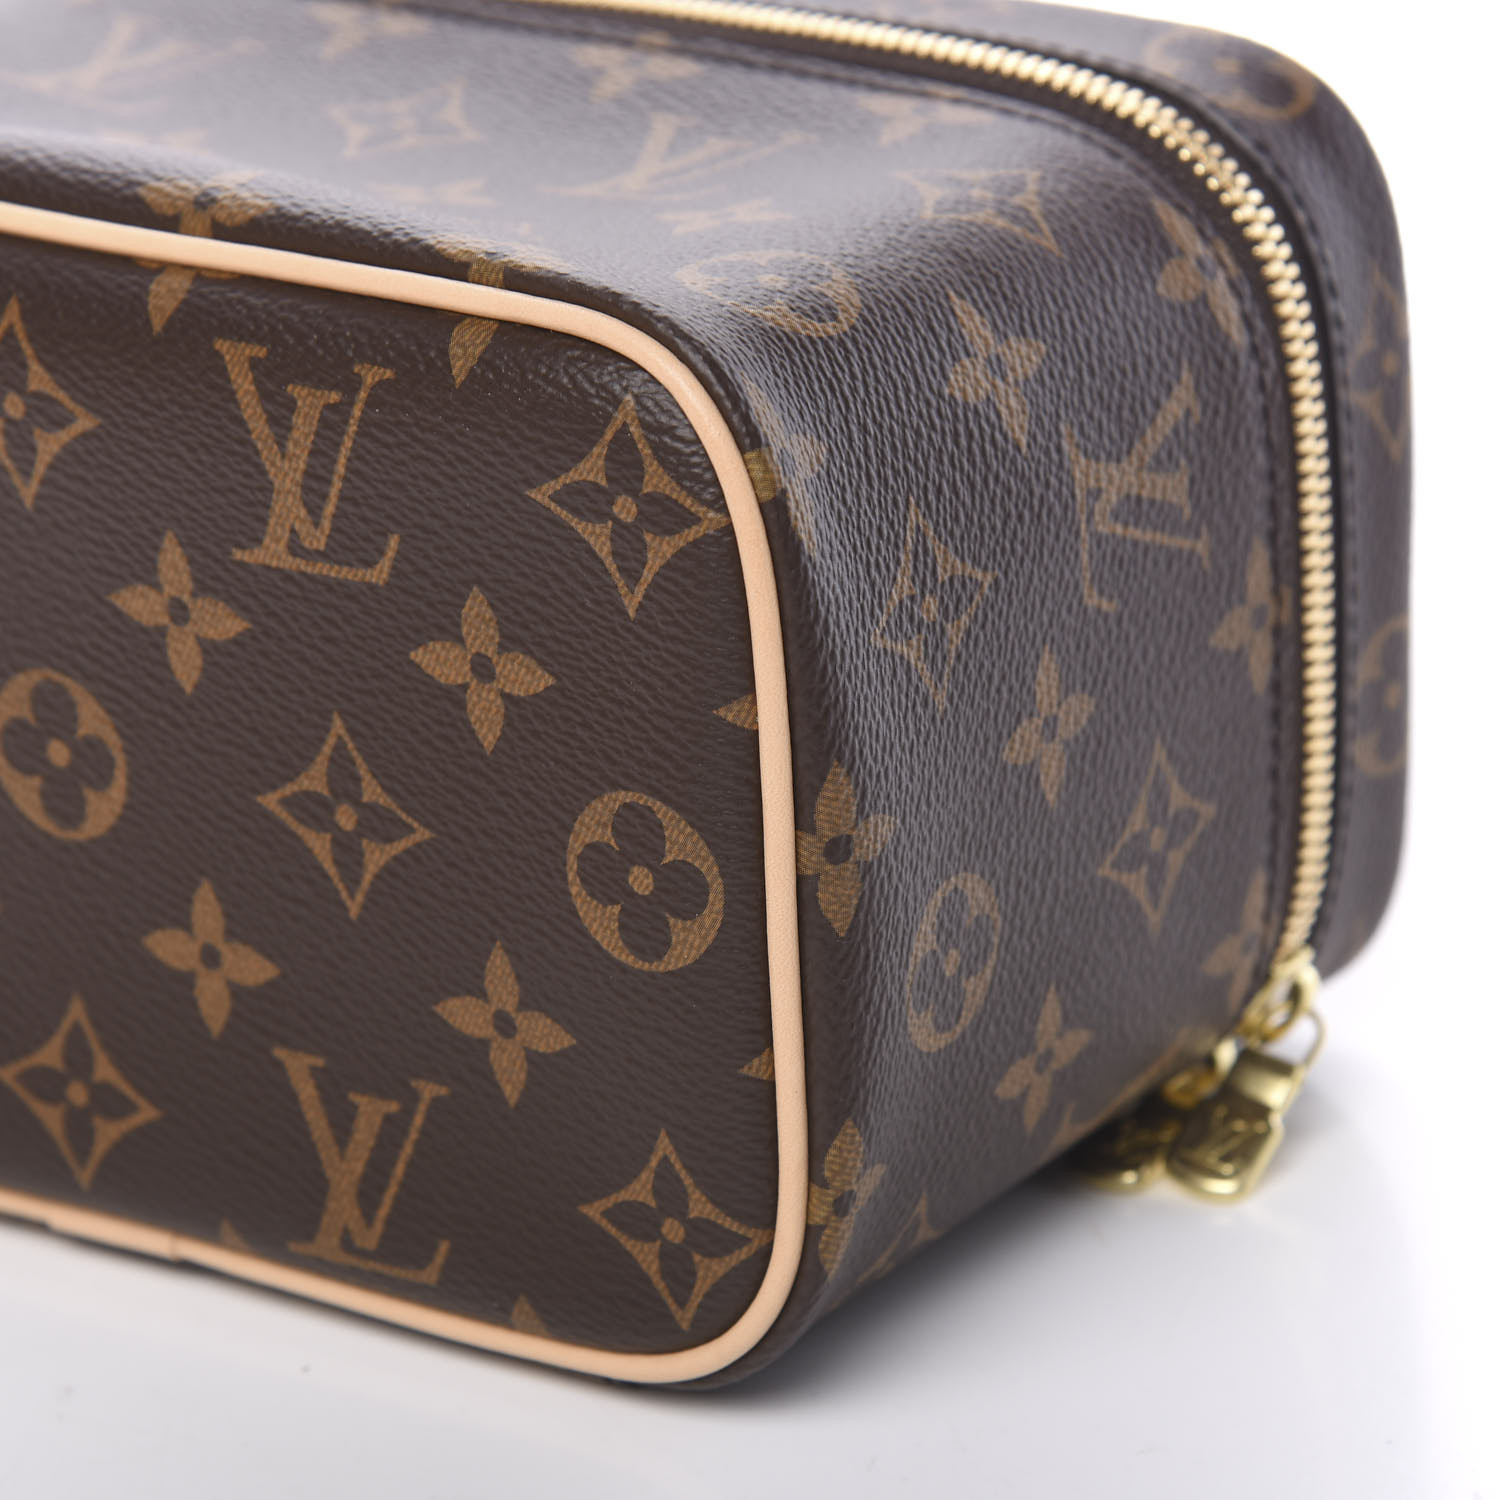 LOUIS VUITTON NICE MINI  Review, Price, & What Fits Inside with and  without Samorga Bag Organizer! 